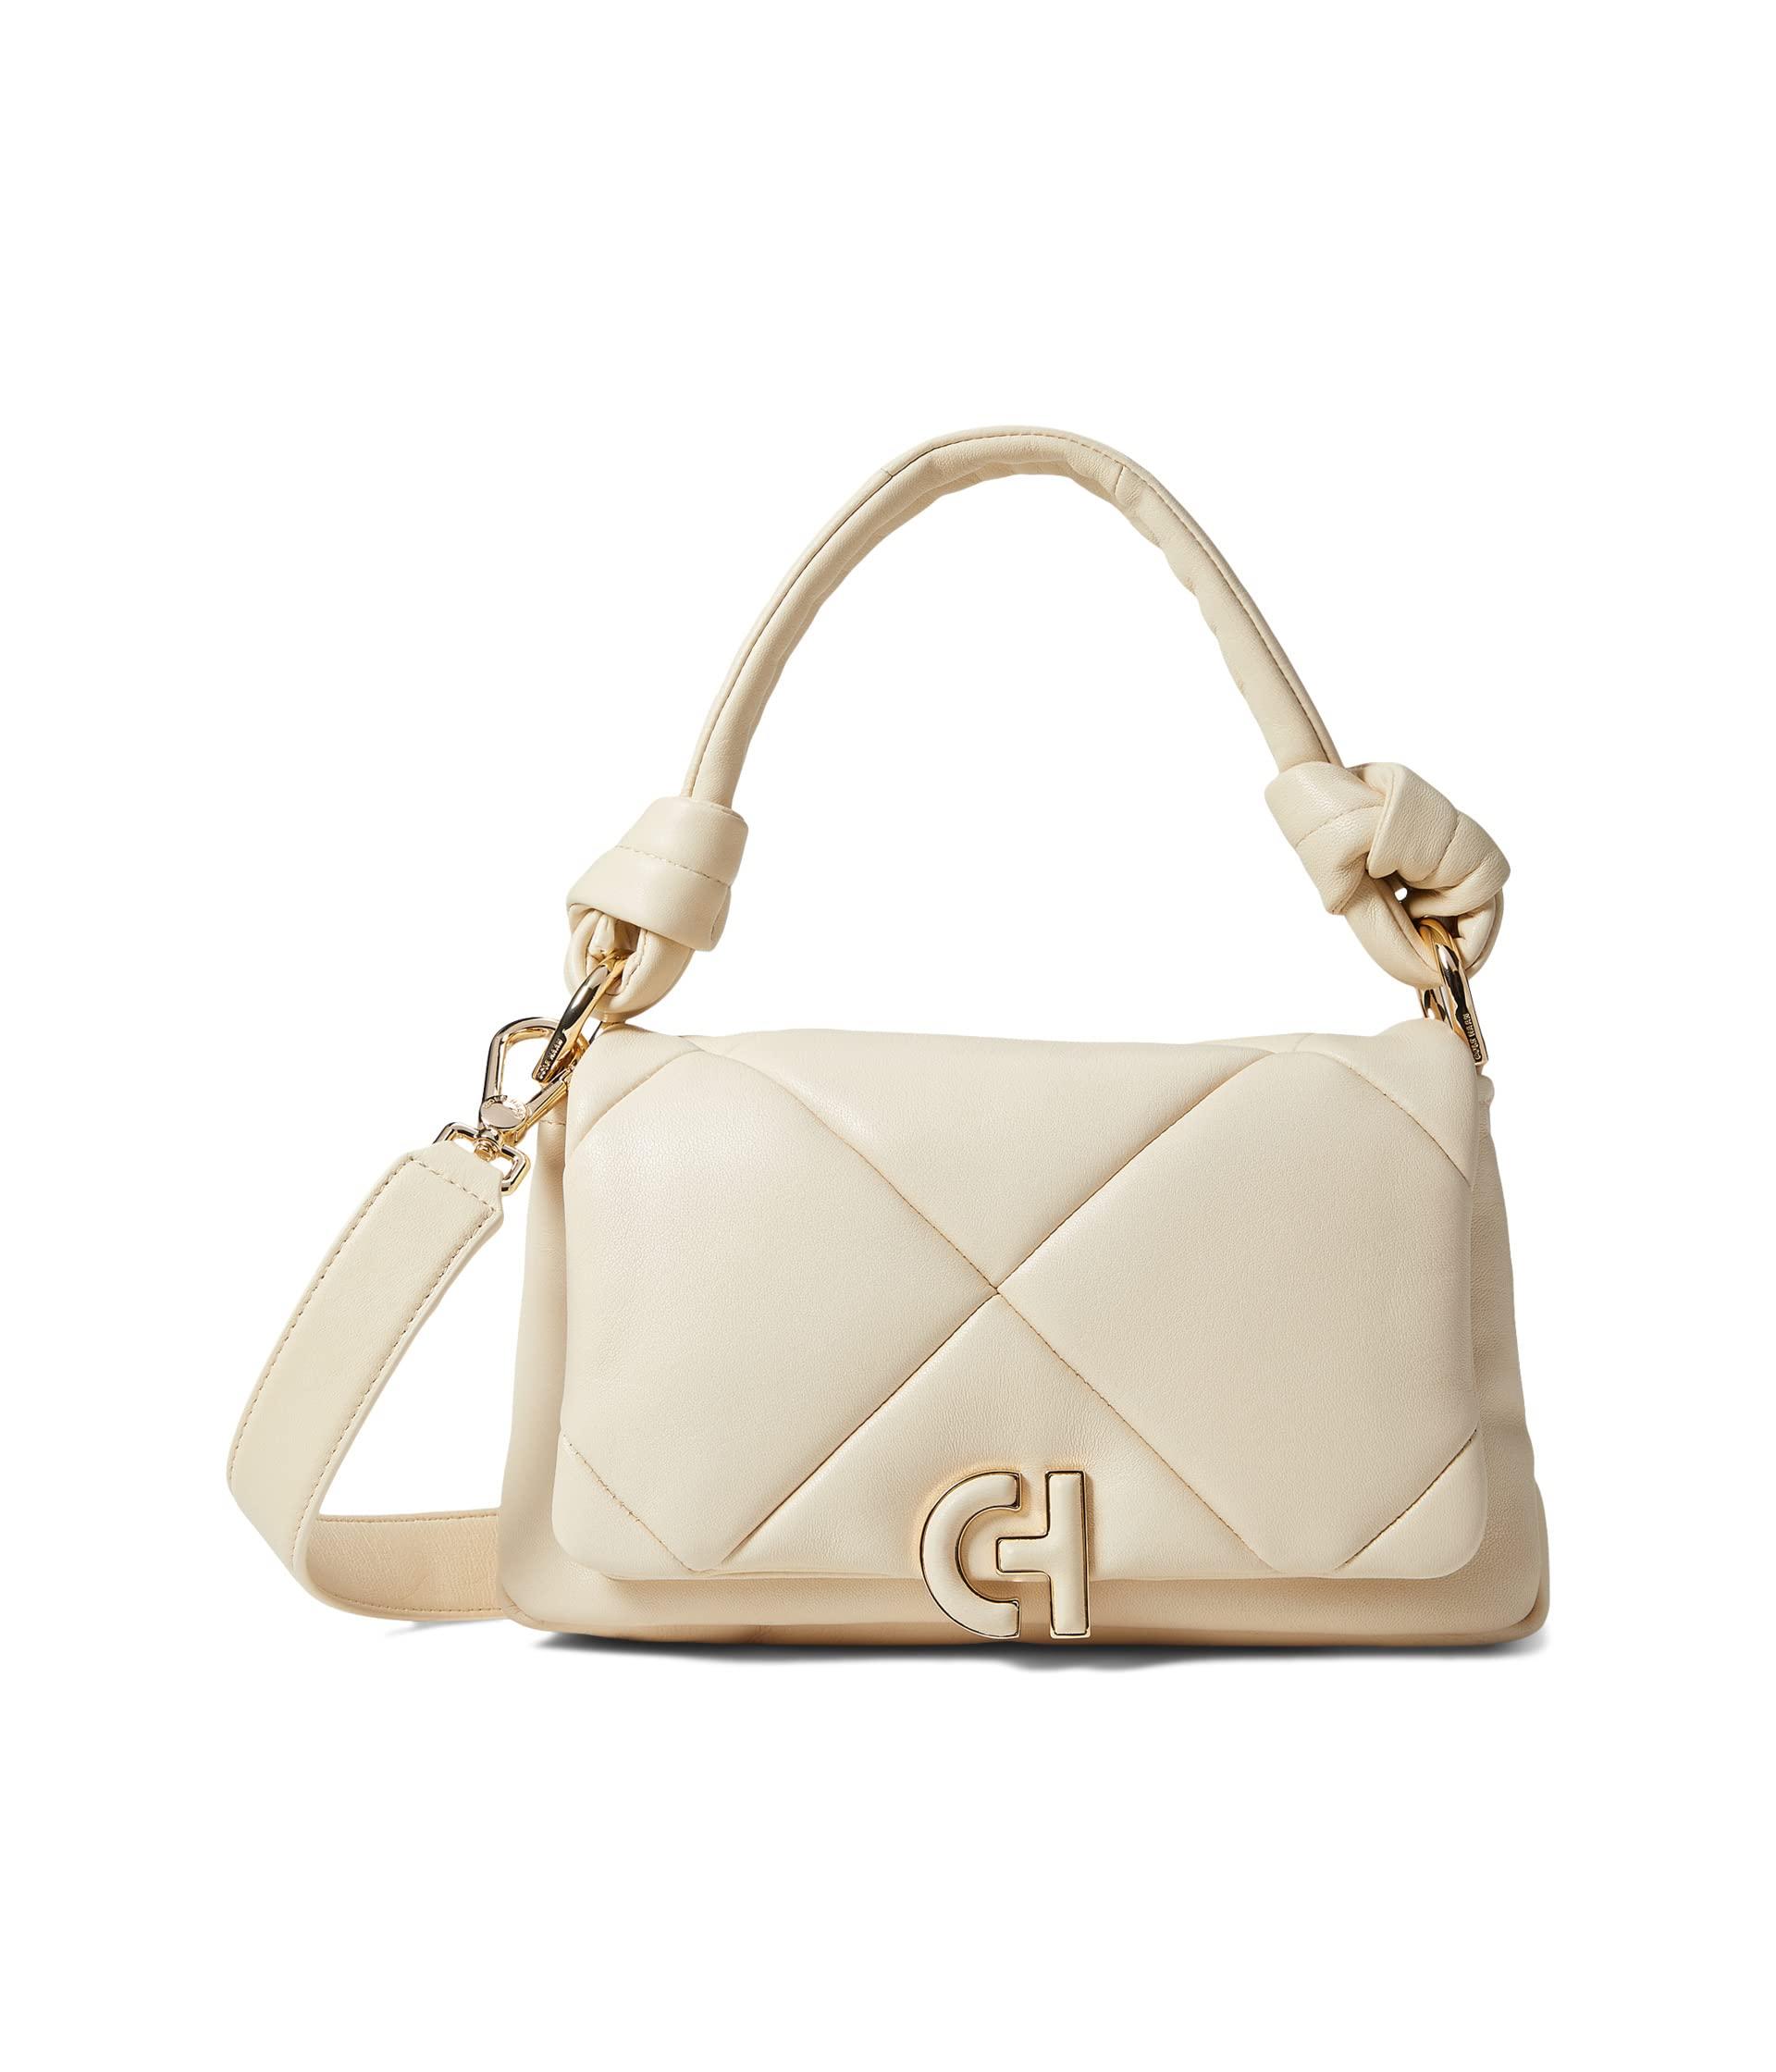 Buy Haute Sauce Woman white quilted handbag (HSHB1253) at